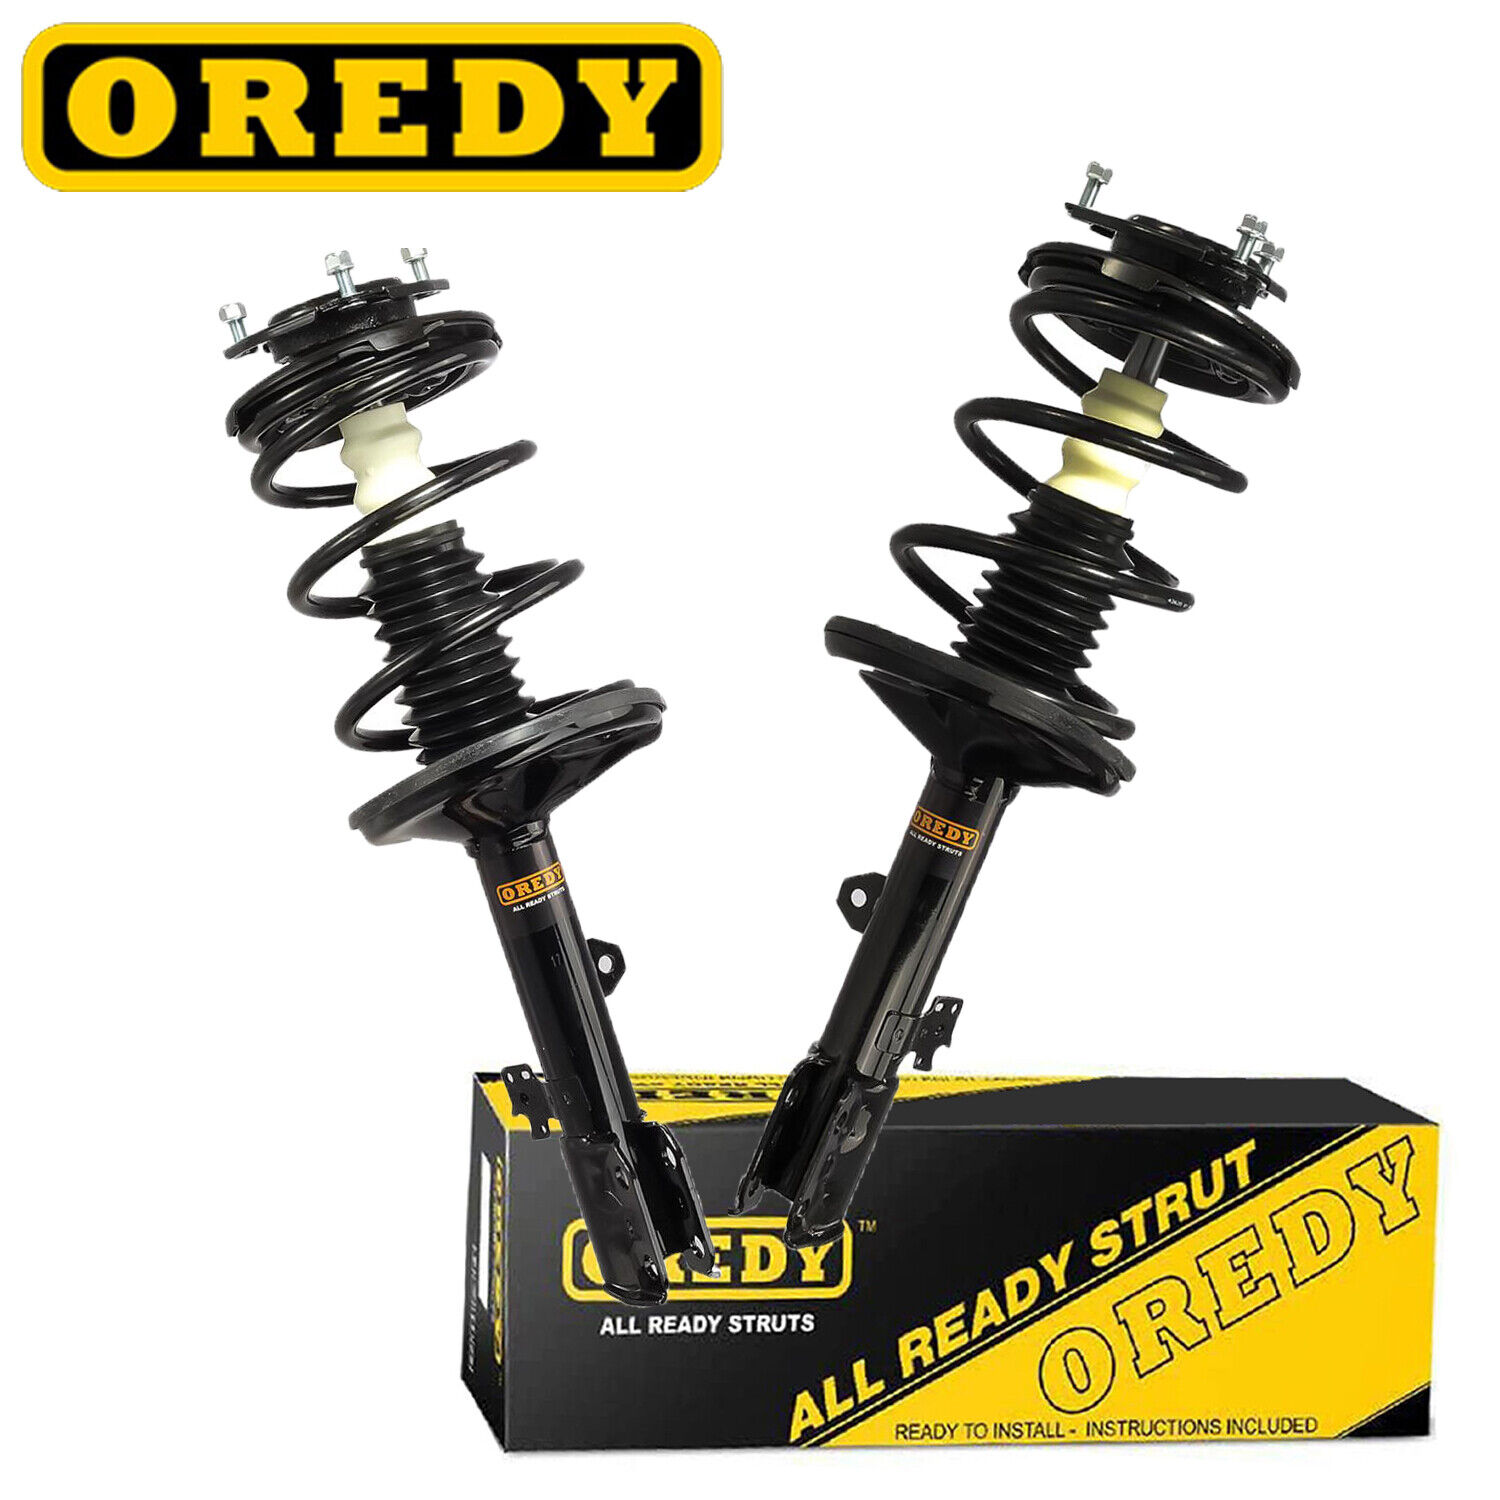 2PC Front Struts & Coil Spring Assembly for 2001 - 2005 Toyota RAV4 FWD